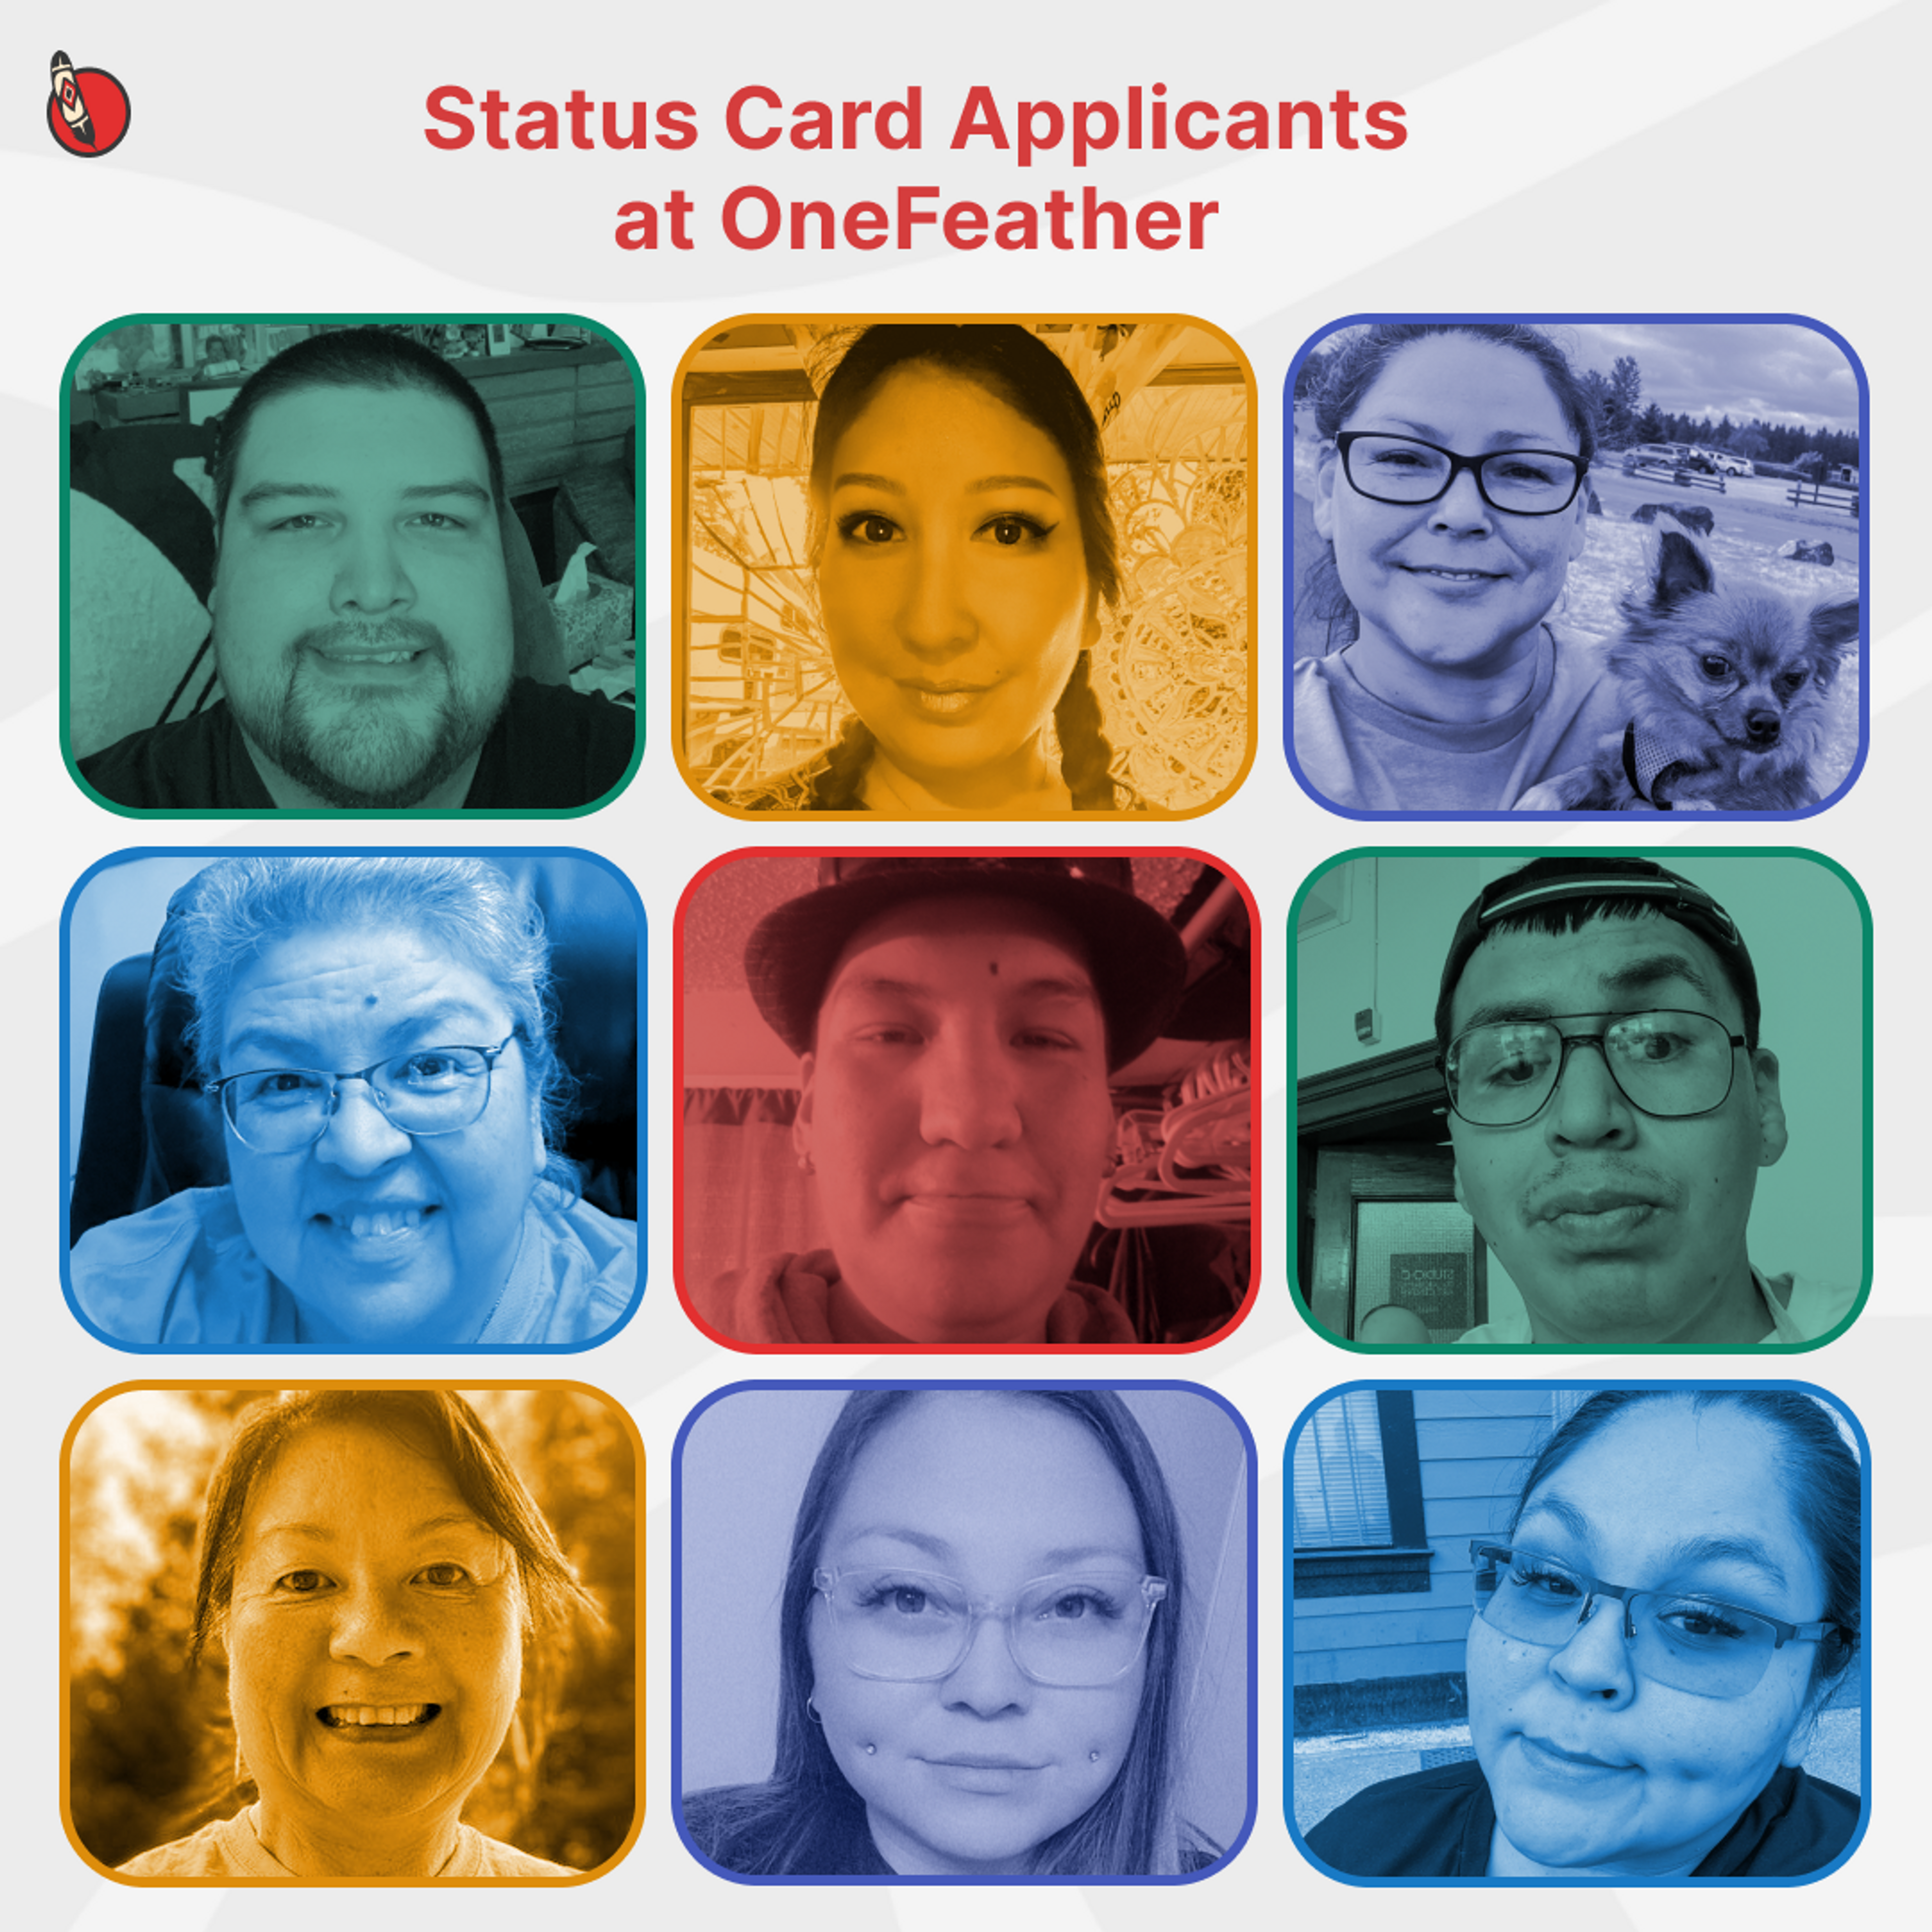 These awesome First Nations folks did a selfie and status card application with us 🤳🏽